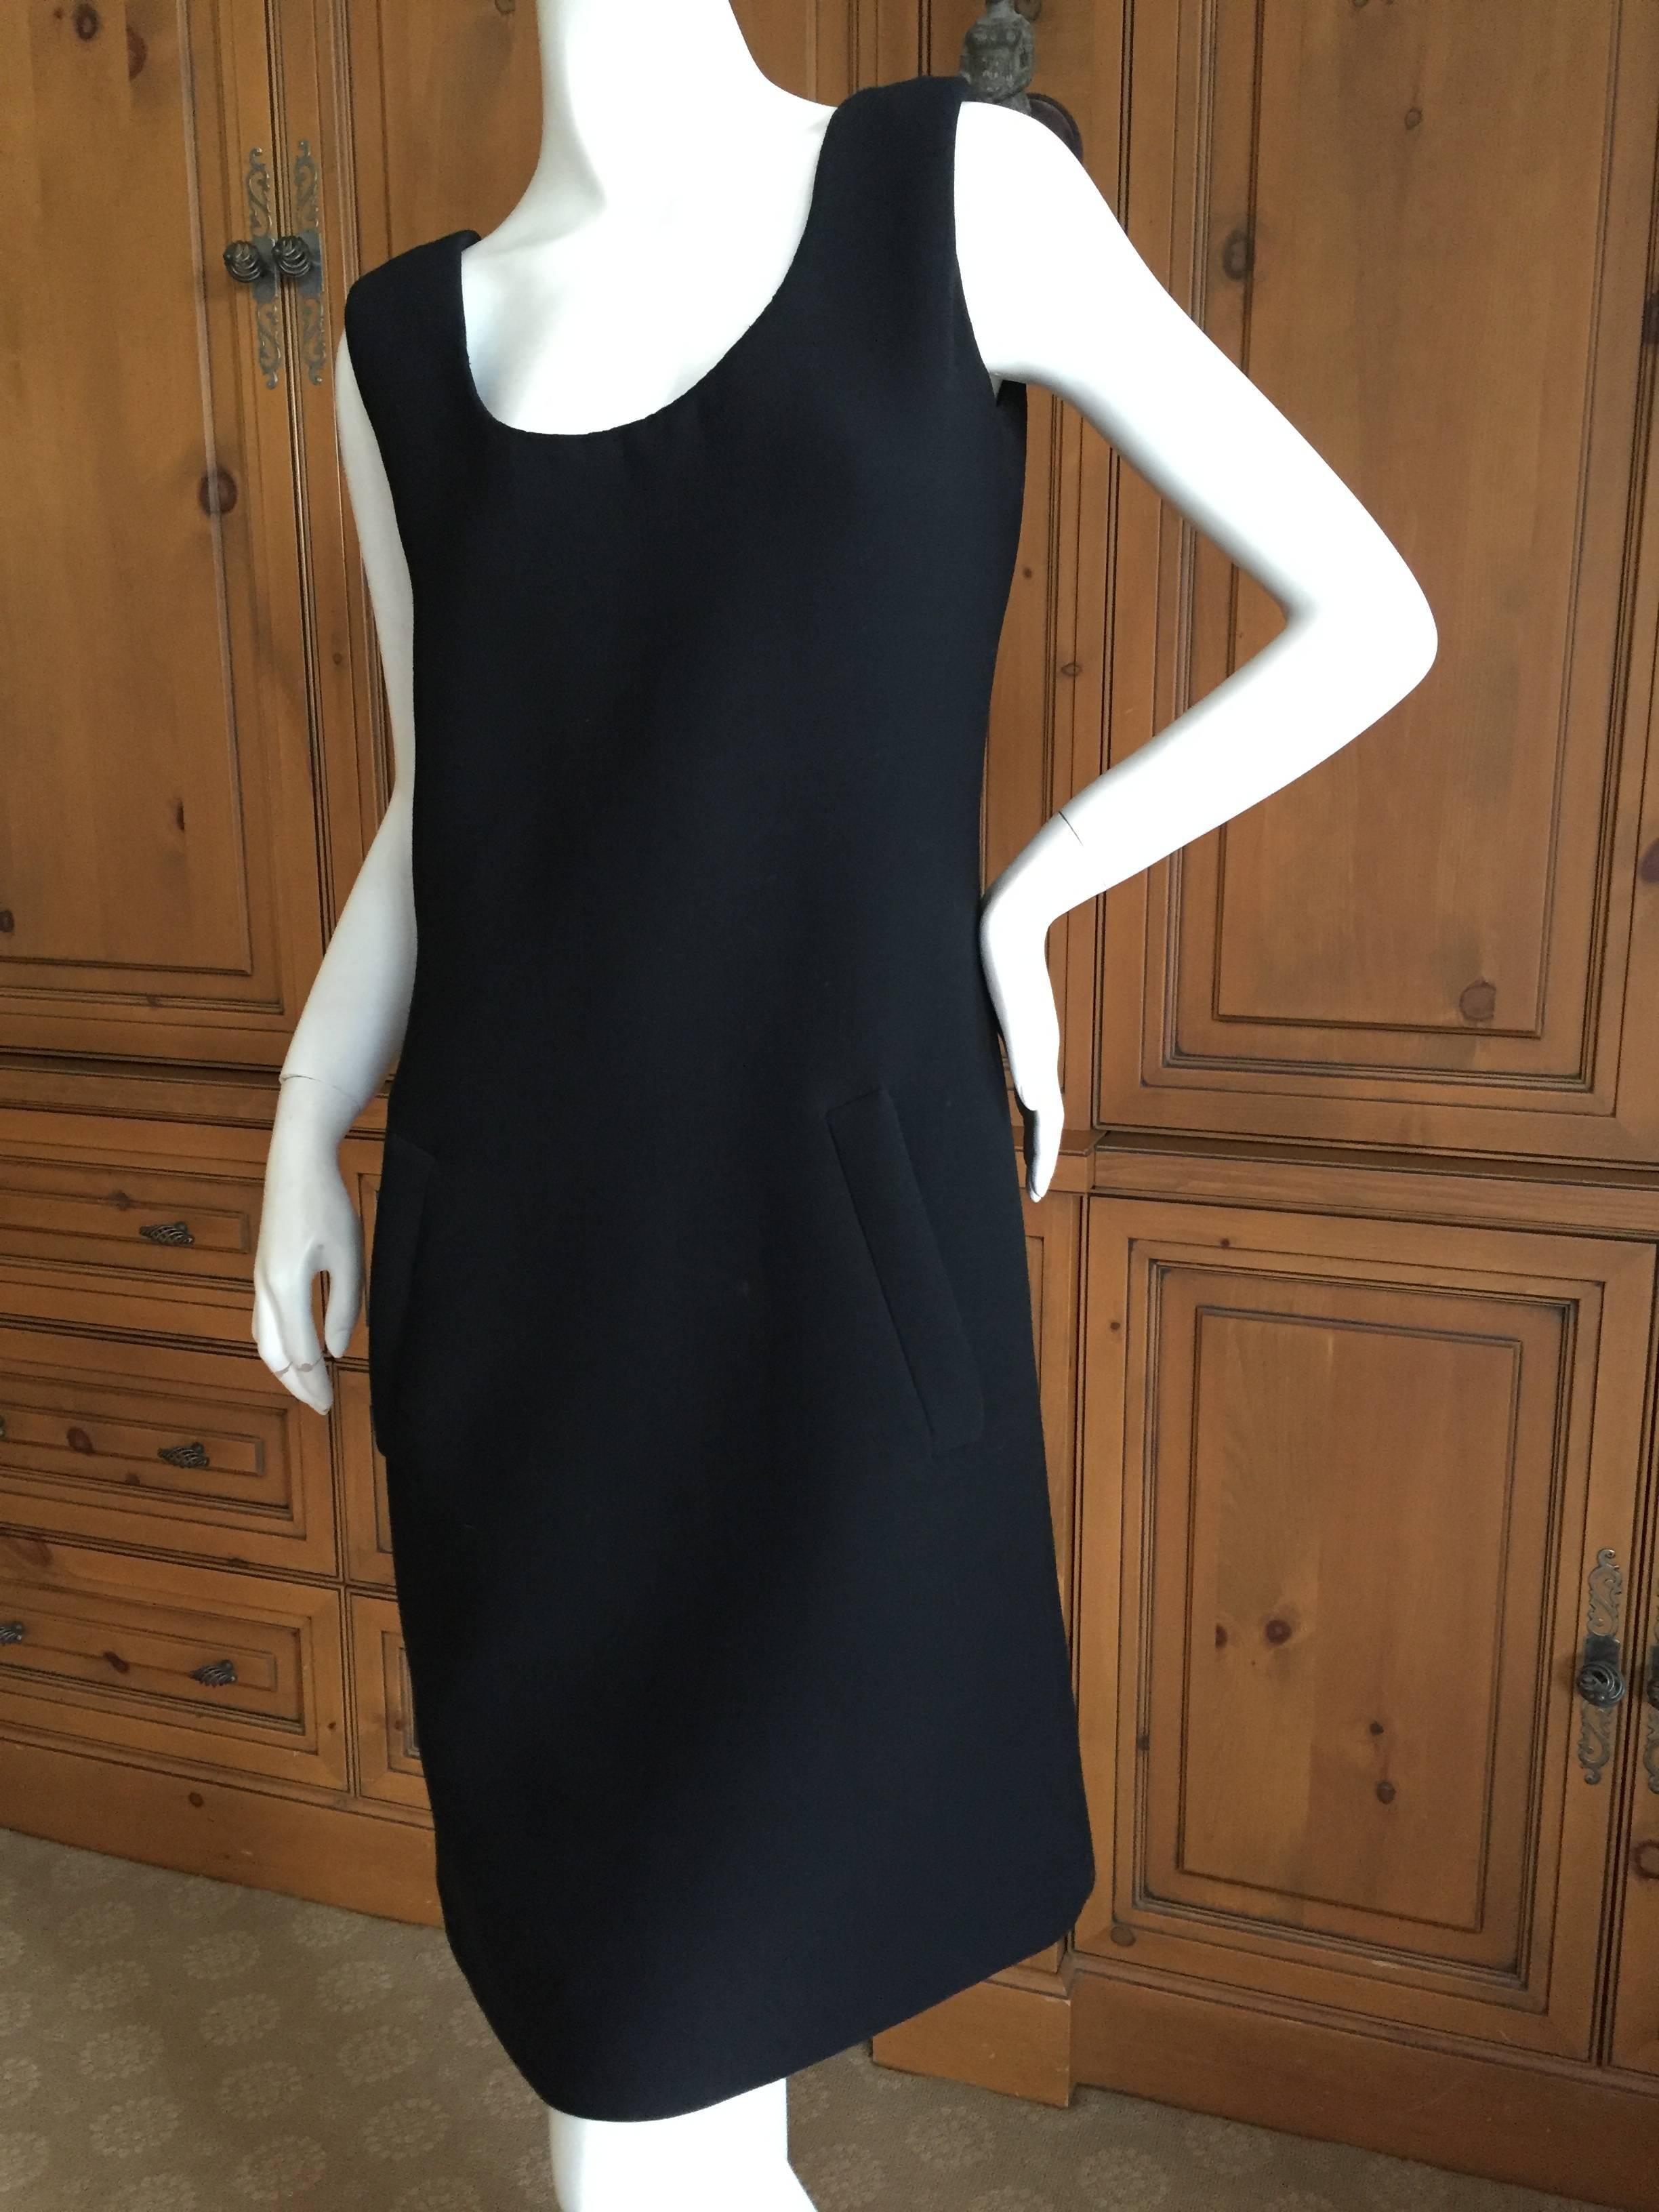 Norman Norell Black Scoop Back Button Dress.
Fully lined in silk.
Tag reads Norman Norell for I. Magnin
Bust 36